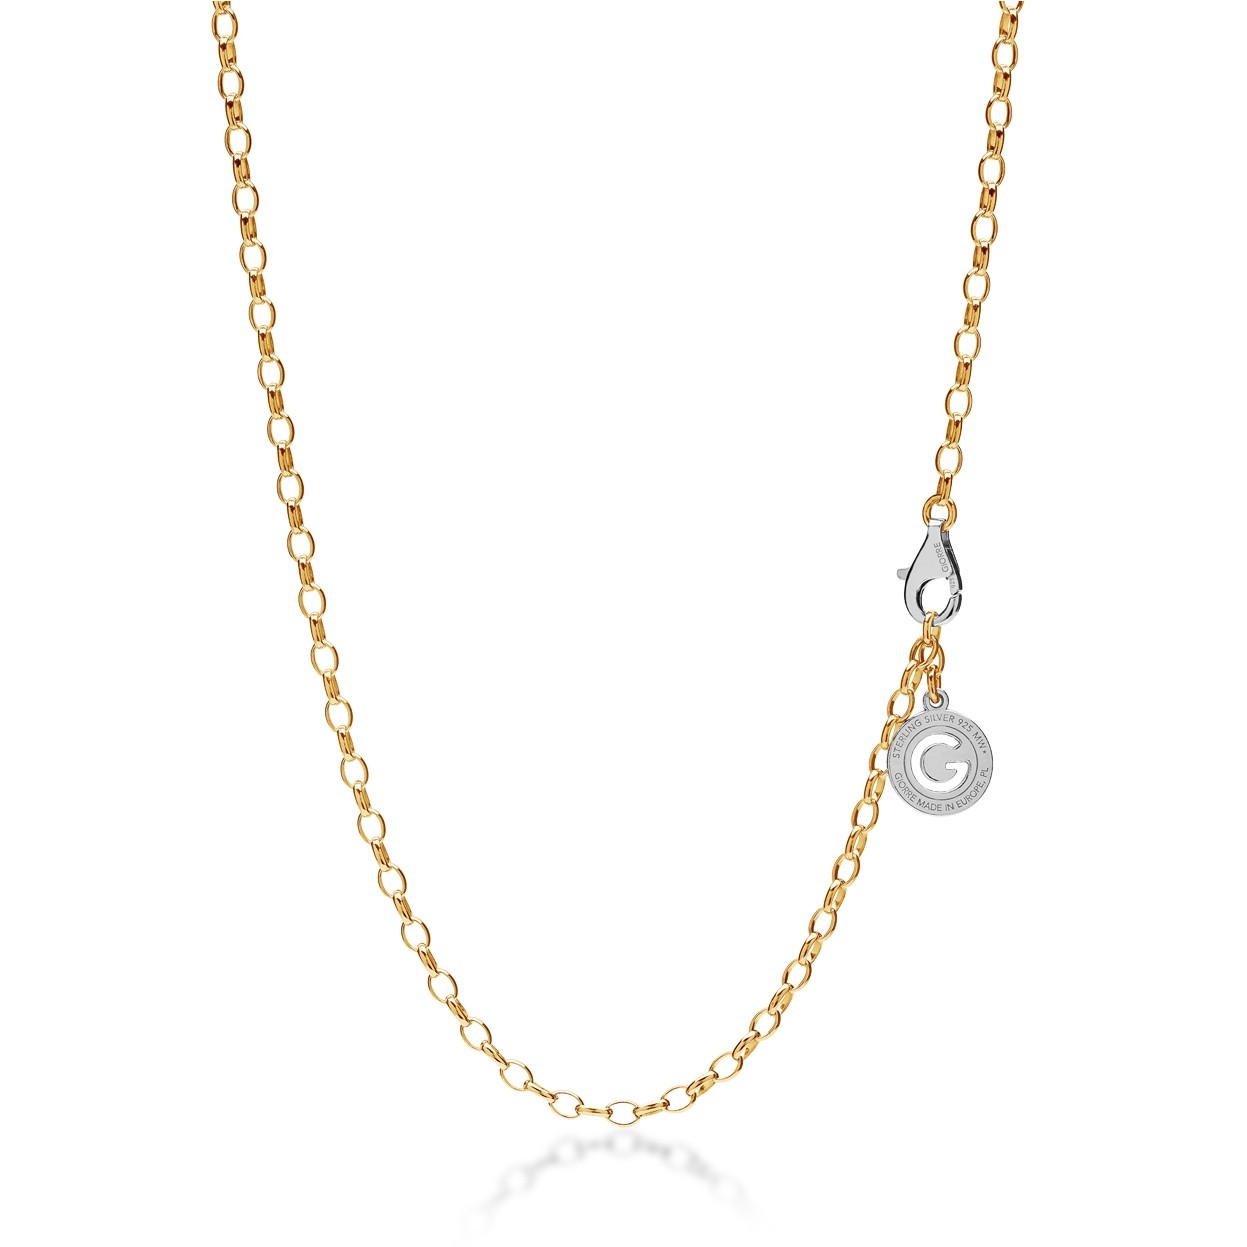 Sterling silver necklace 55-65 cm yellow gold, light rhodium clasp, link 4x3 mm